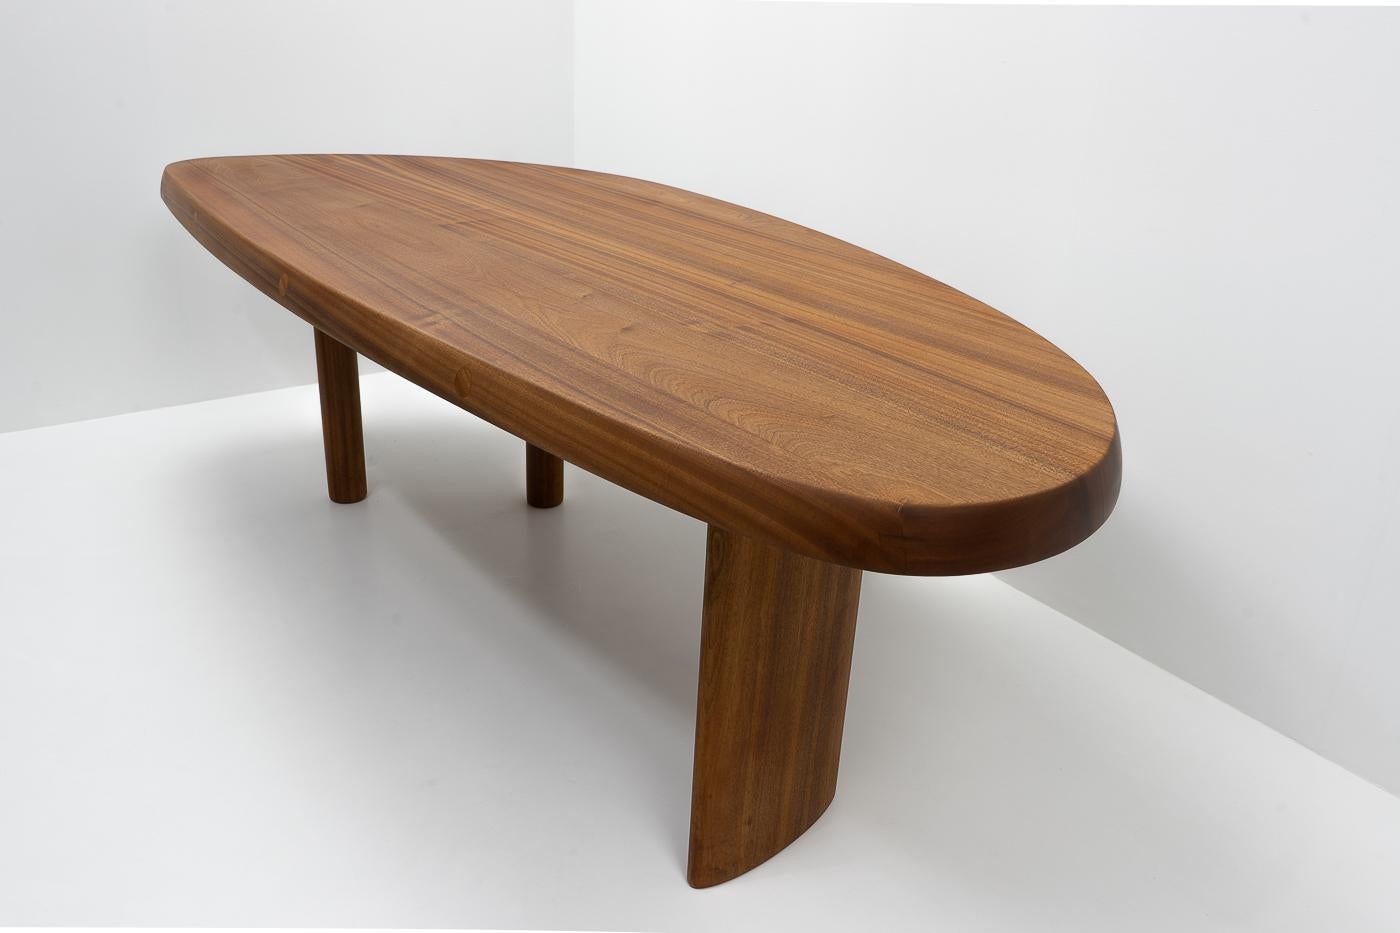 The Free Form Table or 